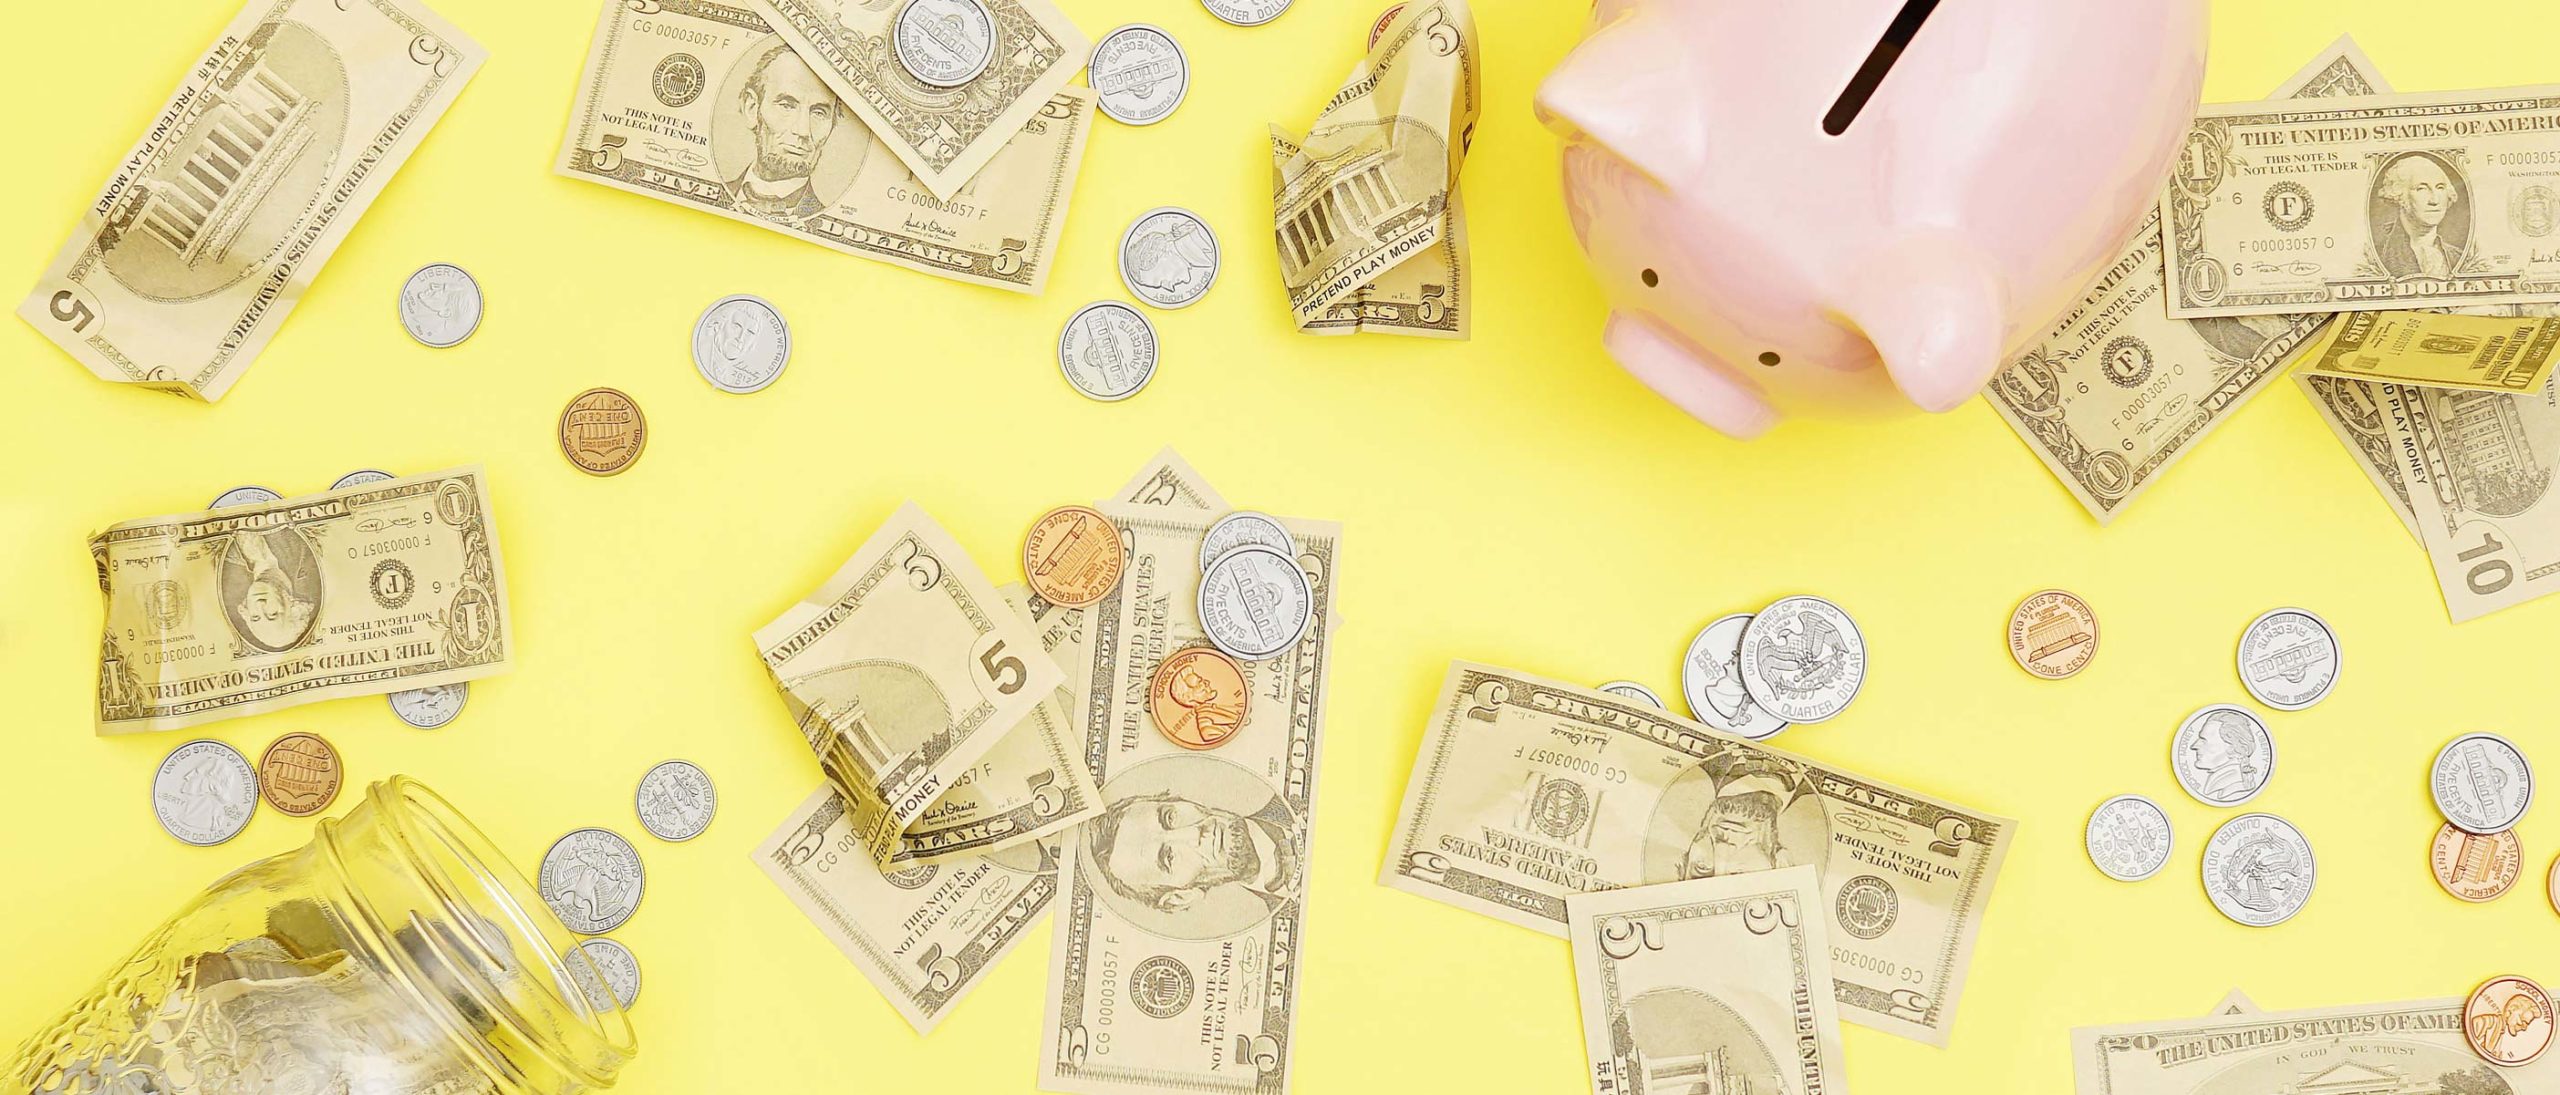 Want to Save Money? Here Are 5 Ways to Get Started